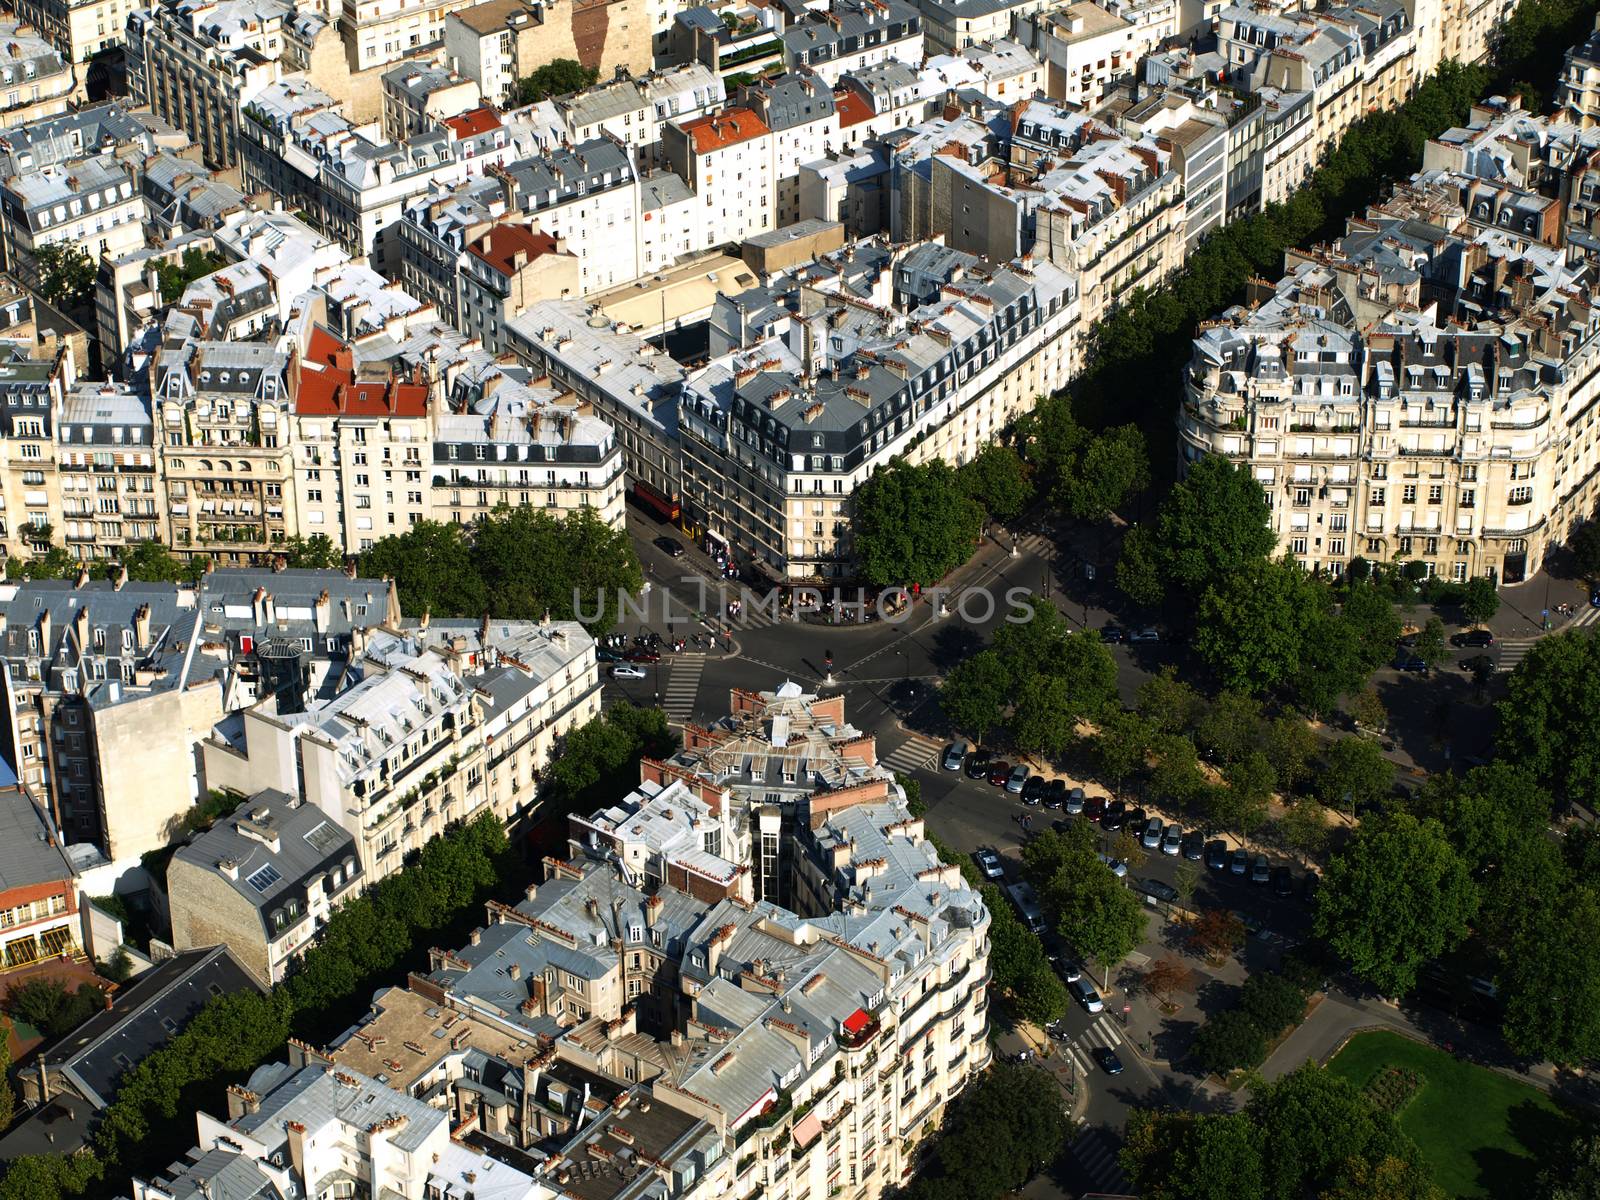 View from Eiffel tower in Paris on rooftops (France)